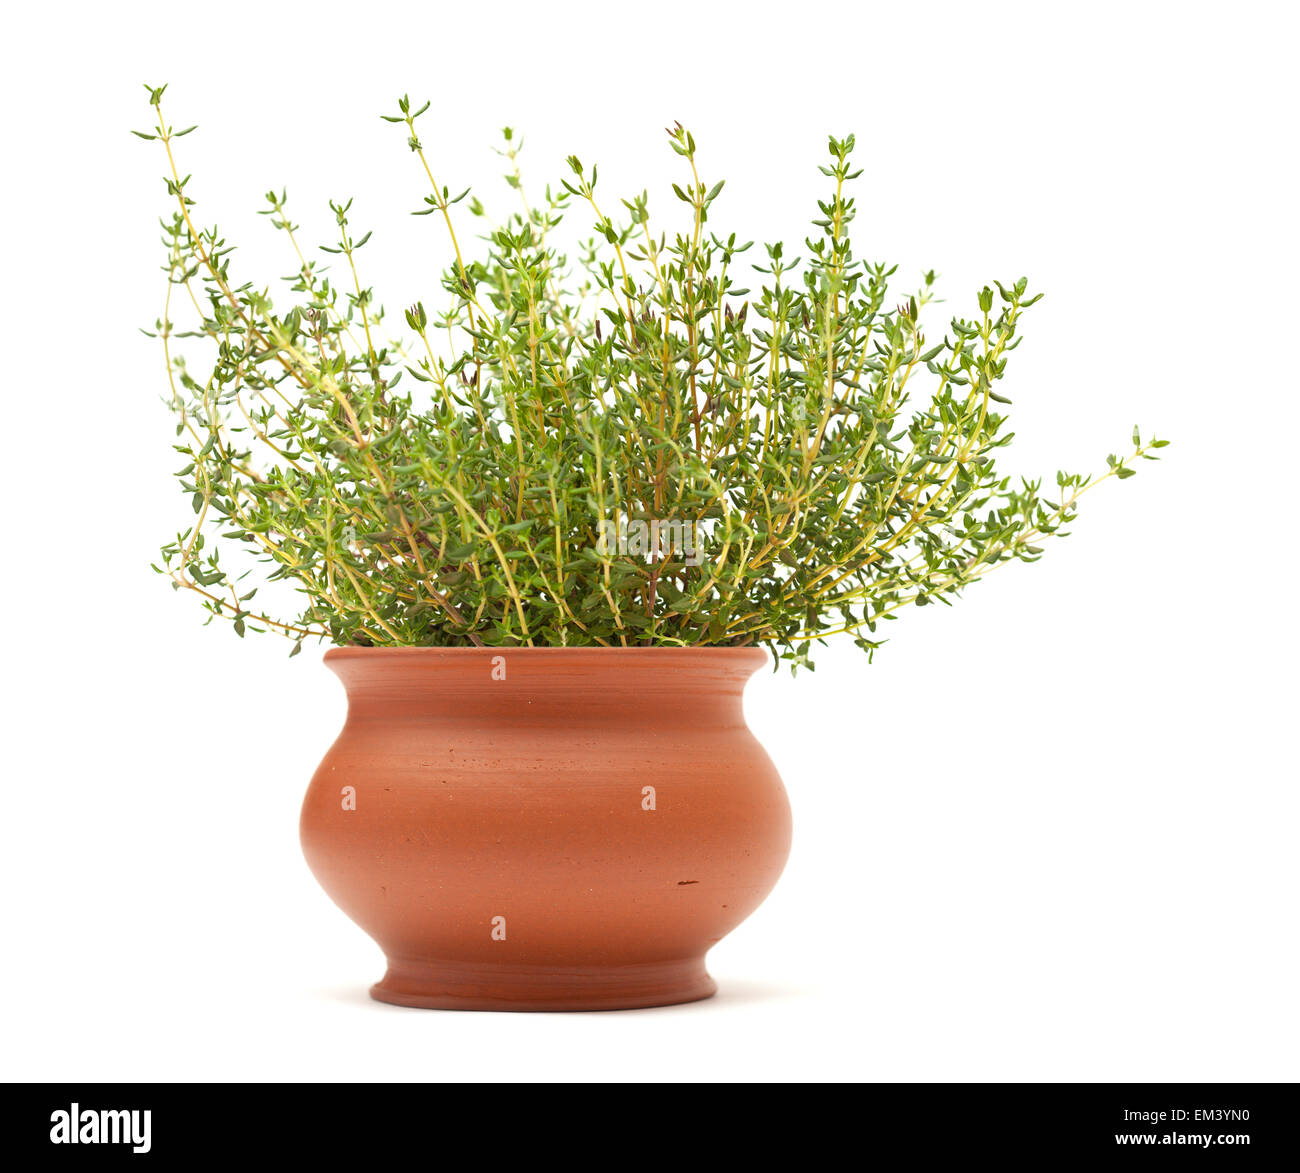 Thyme plant in a terracotta pot isolated on white background Stock Photo